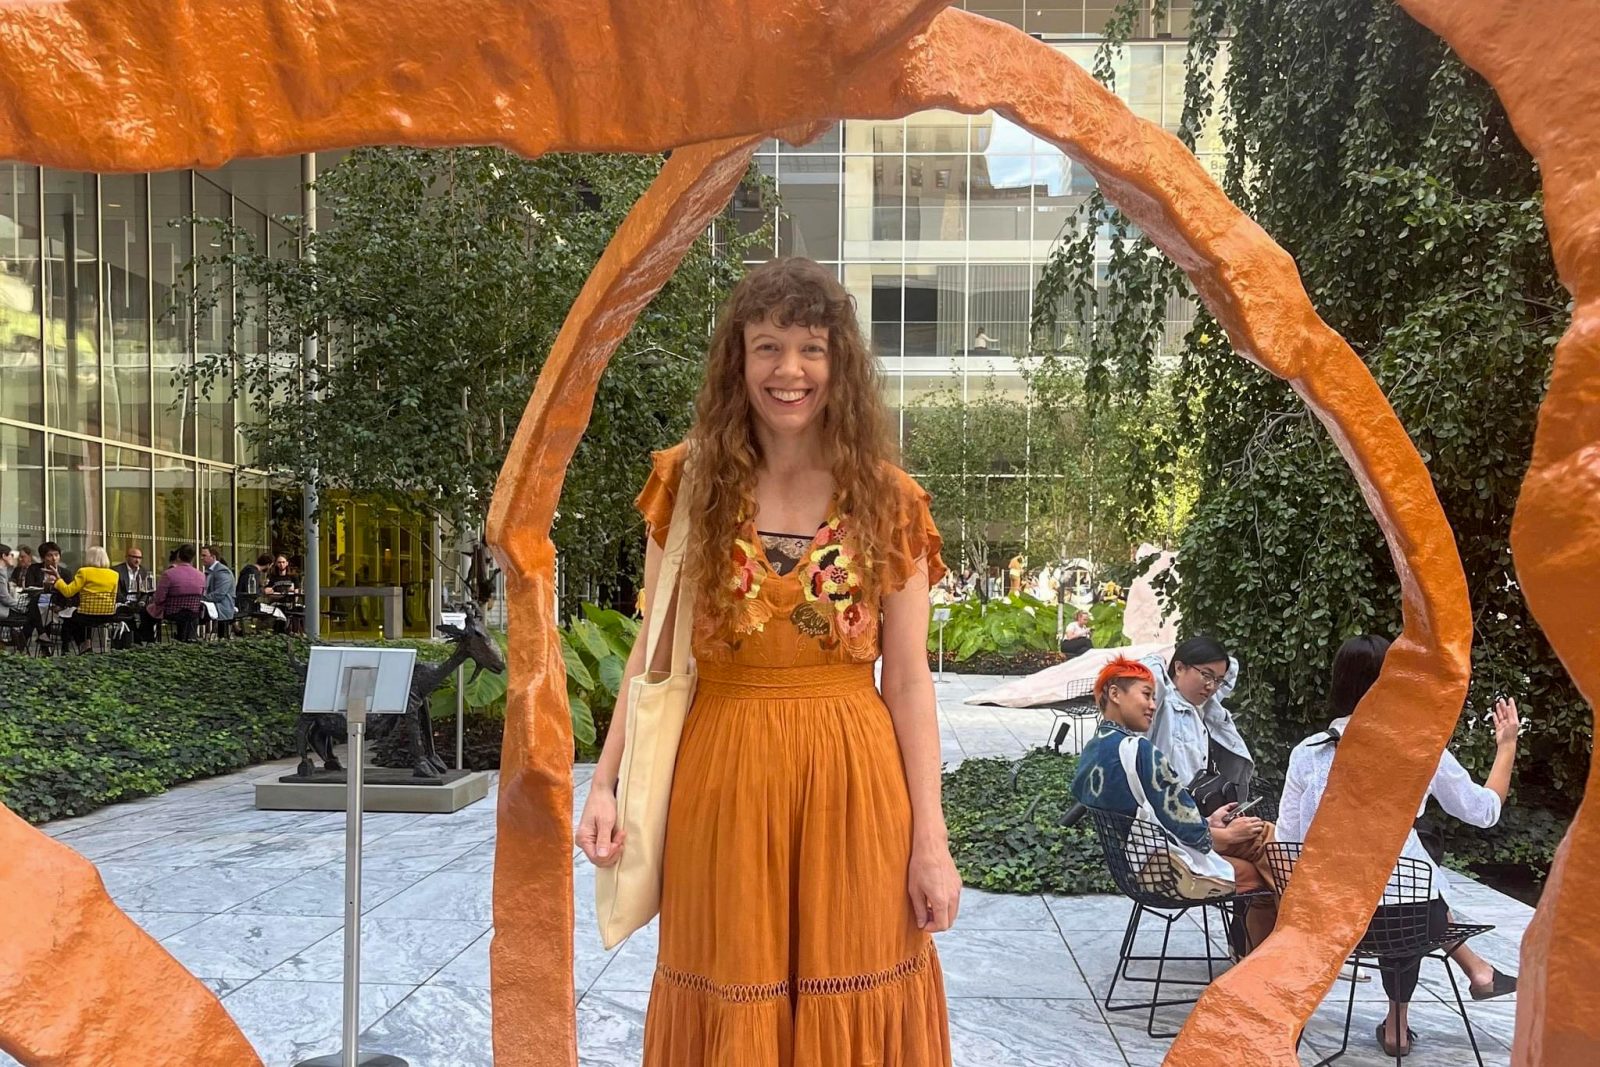 Jackie Armstrong stands in New York City in a courtyard beneath a sculpture. She is smiling warmly wearing a bright orange dress.